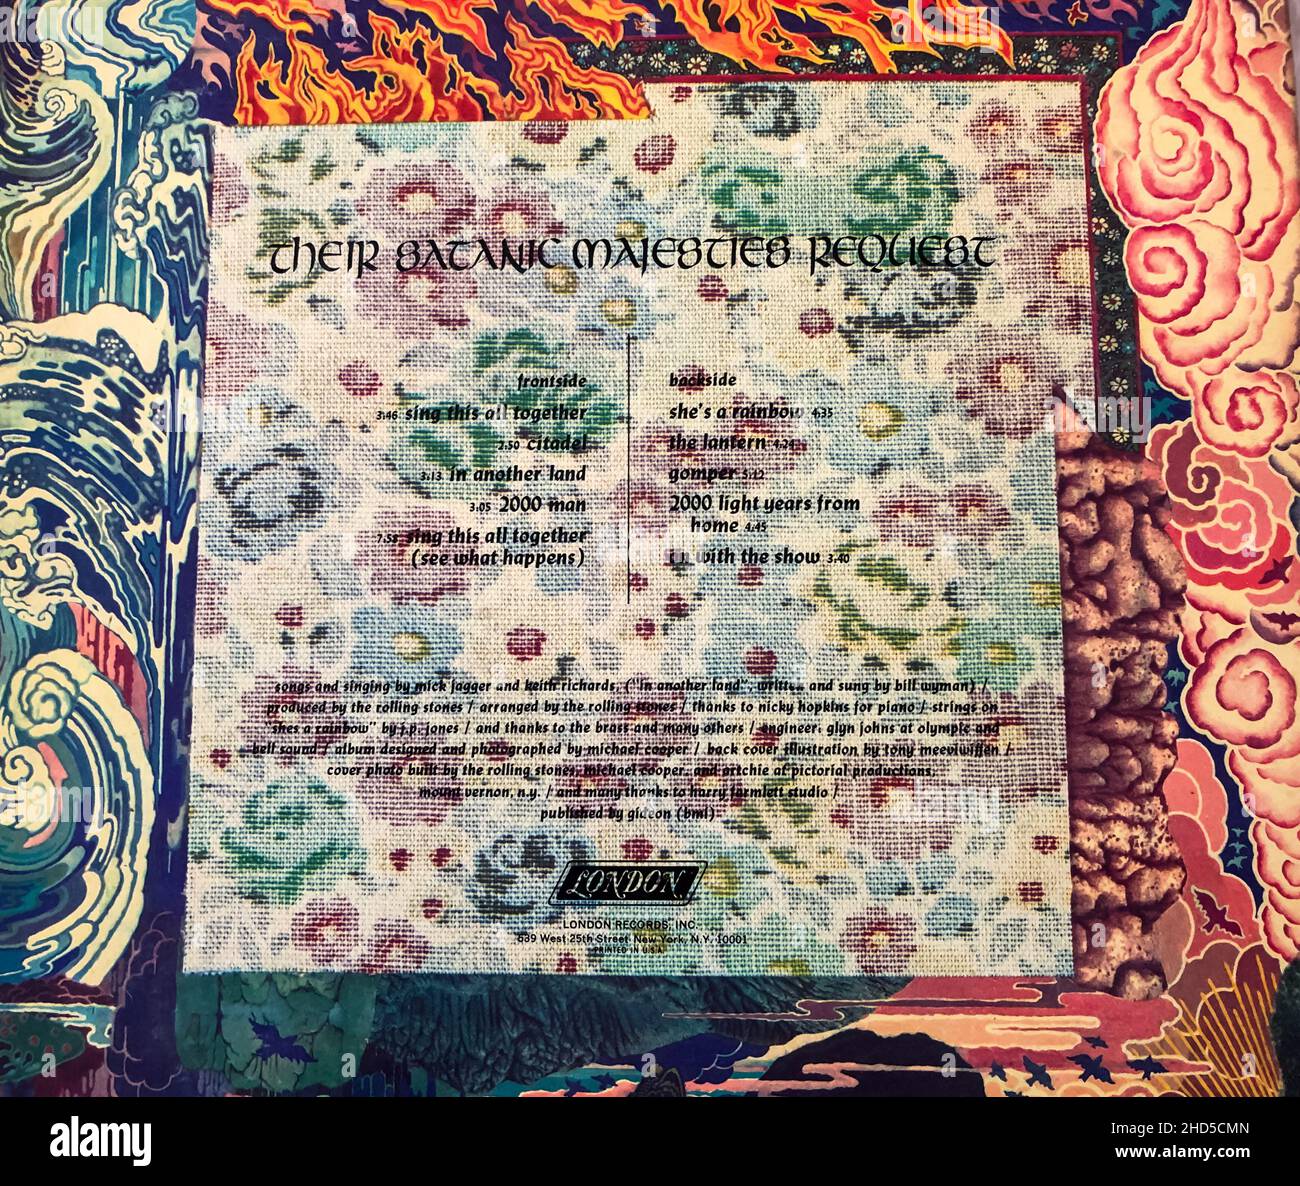 Rolling Stones Rock Music Anthology Album, 1960s Their Satanic Majesties Request, 1967, Psychedelic Artwork Stock Photo